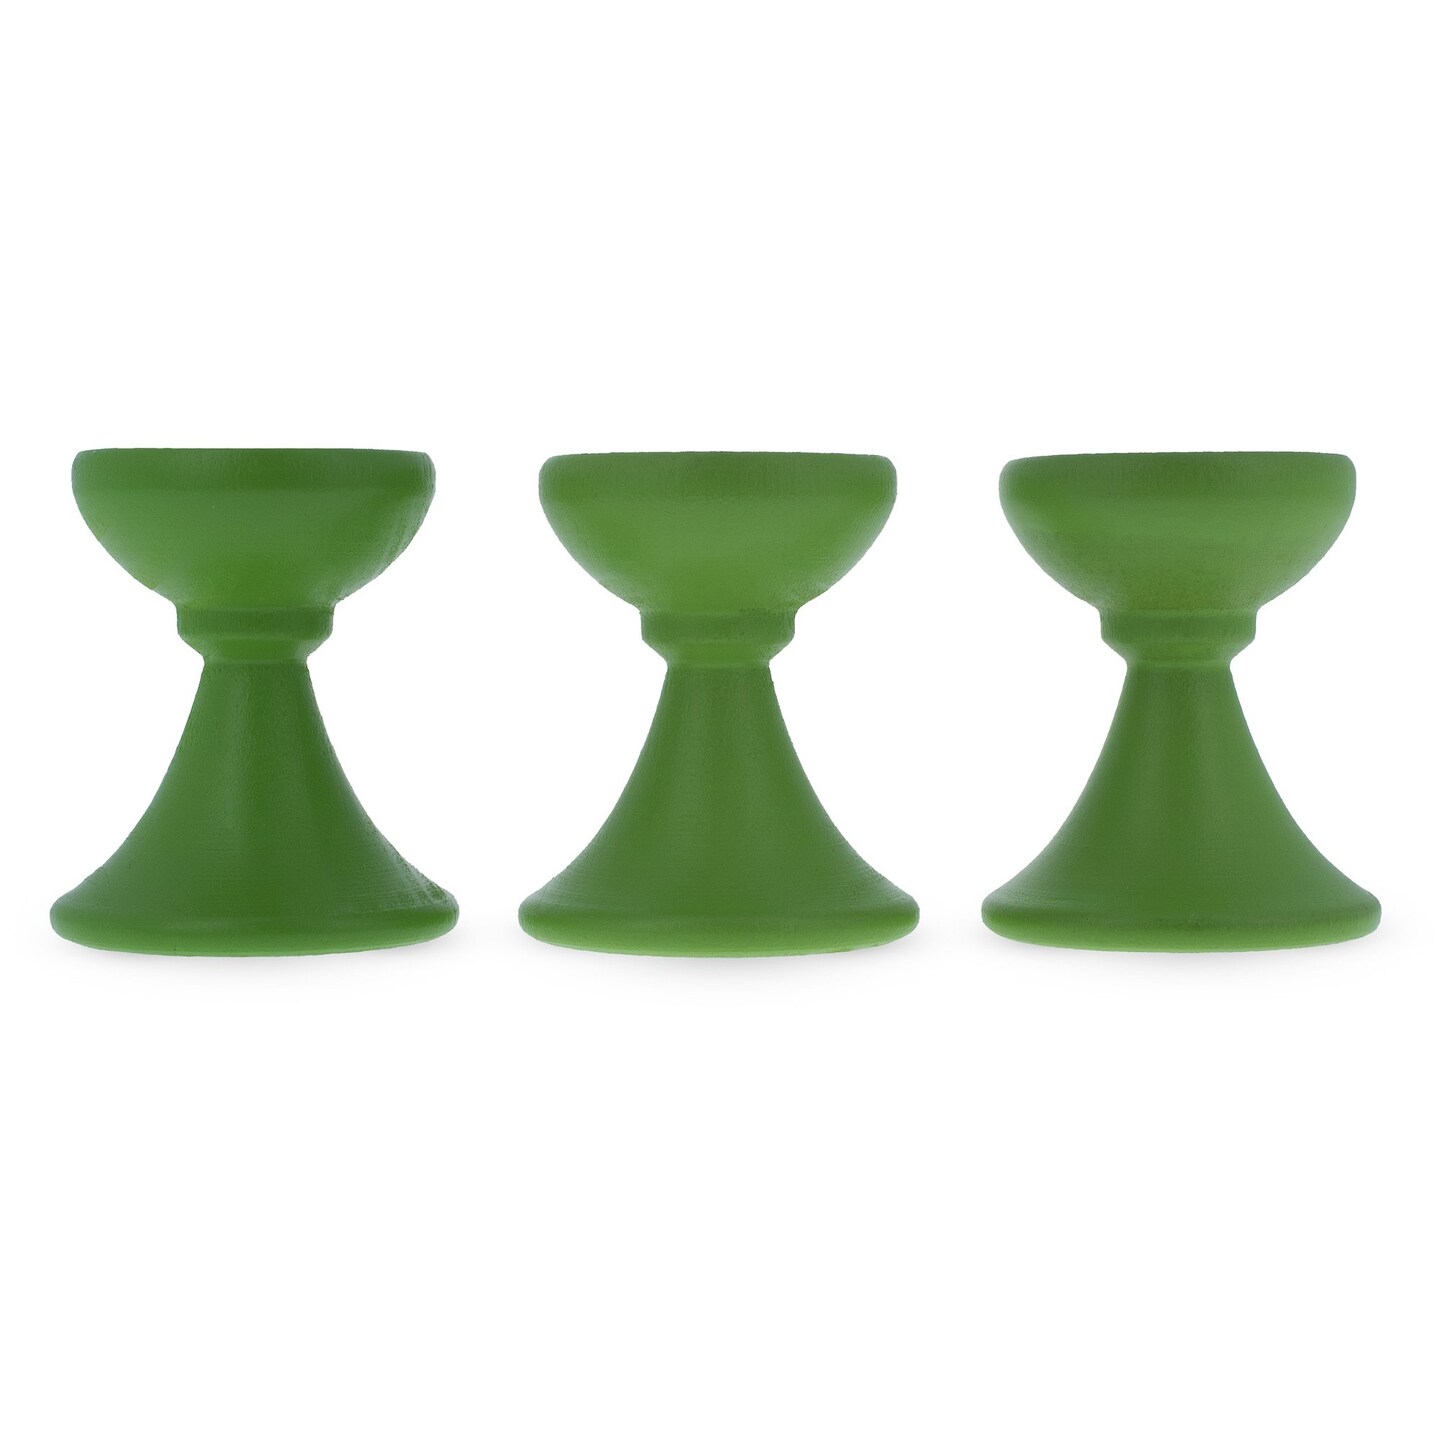 Set of 3 Lime Green Wooden Egg Stands Holders Displays 1.4 Inches